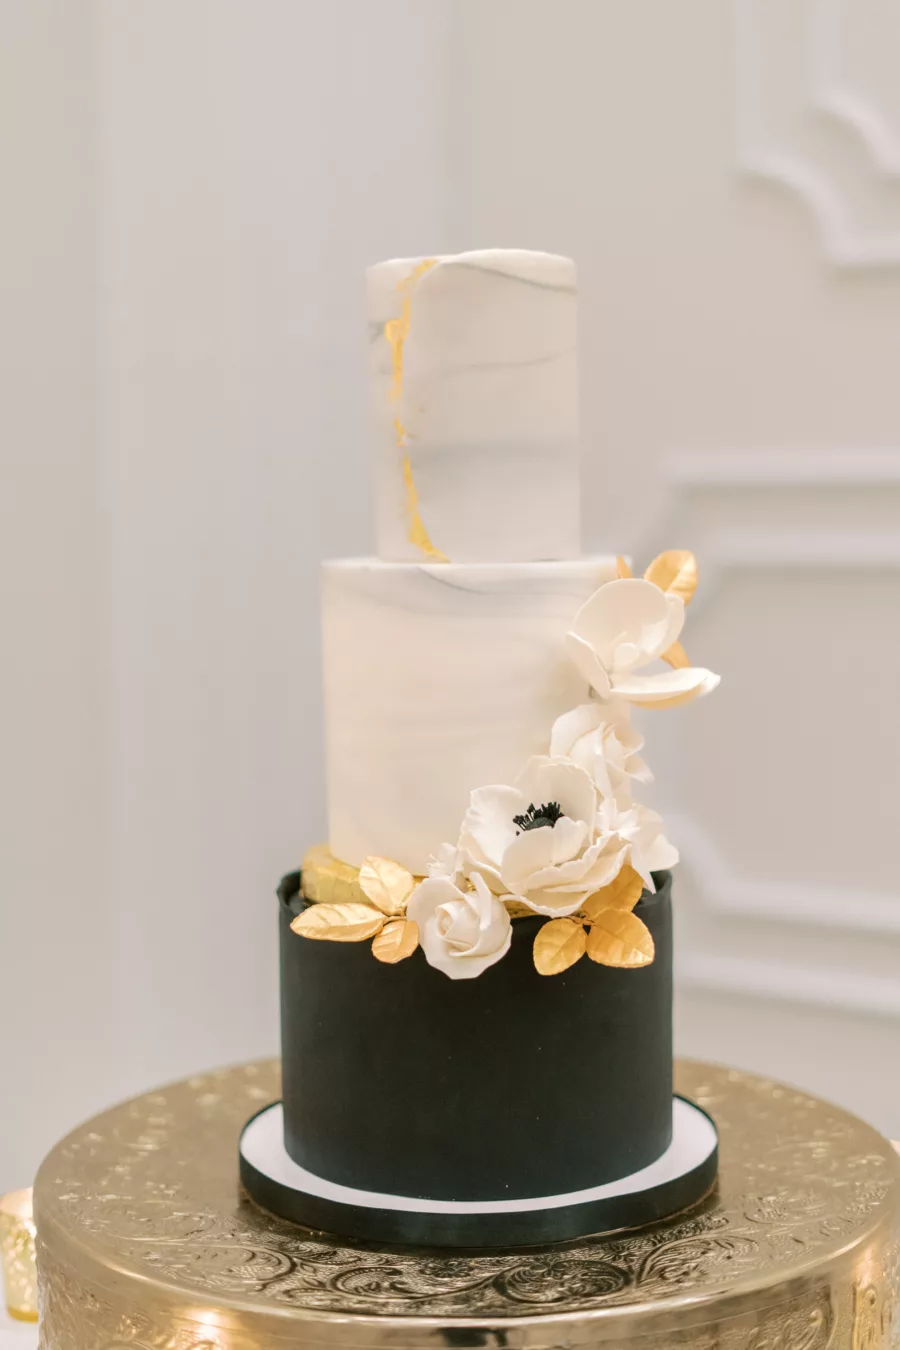 Round Three-Tiered Marble and Black Fondant Wedding Cake Inspiration with White Anemone and Gold Leaves Accents | Tampa Bay Cake Company